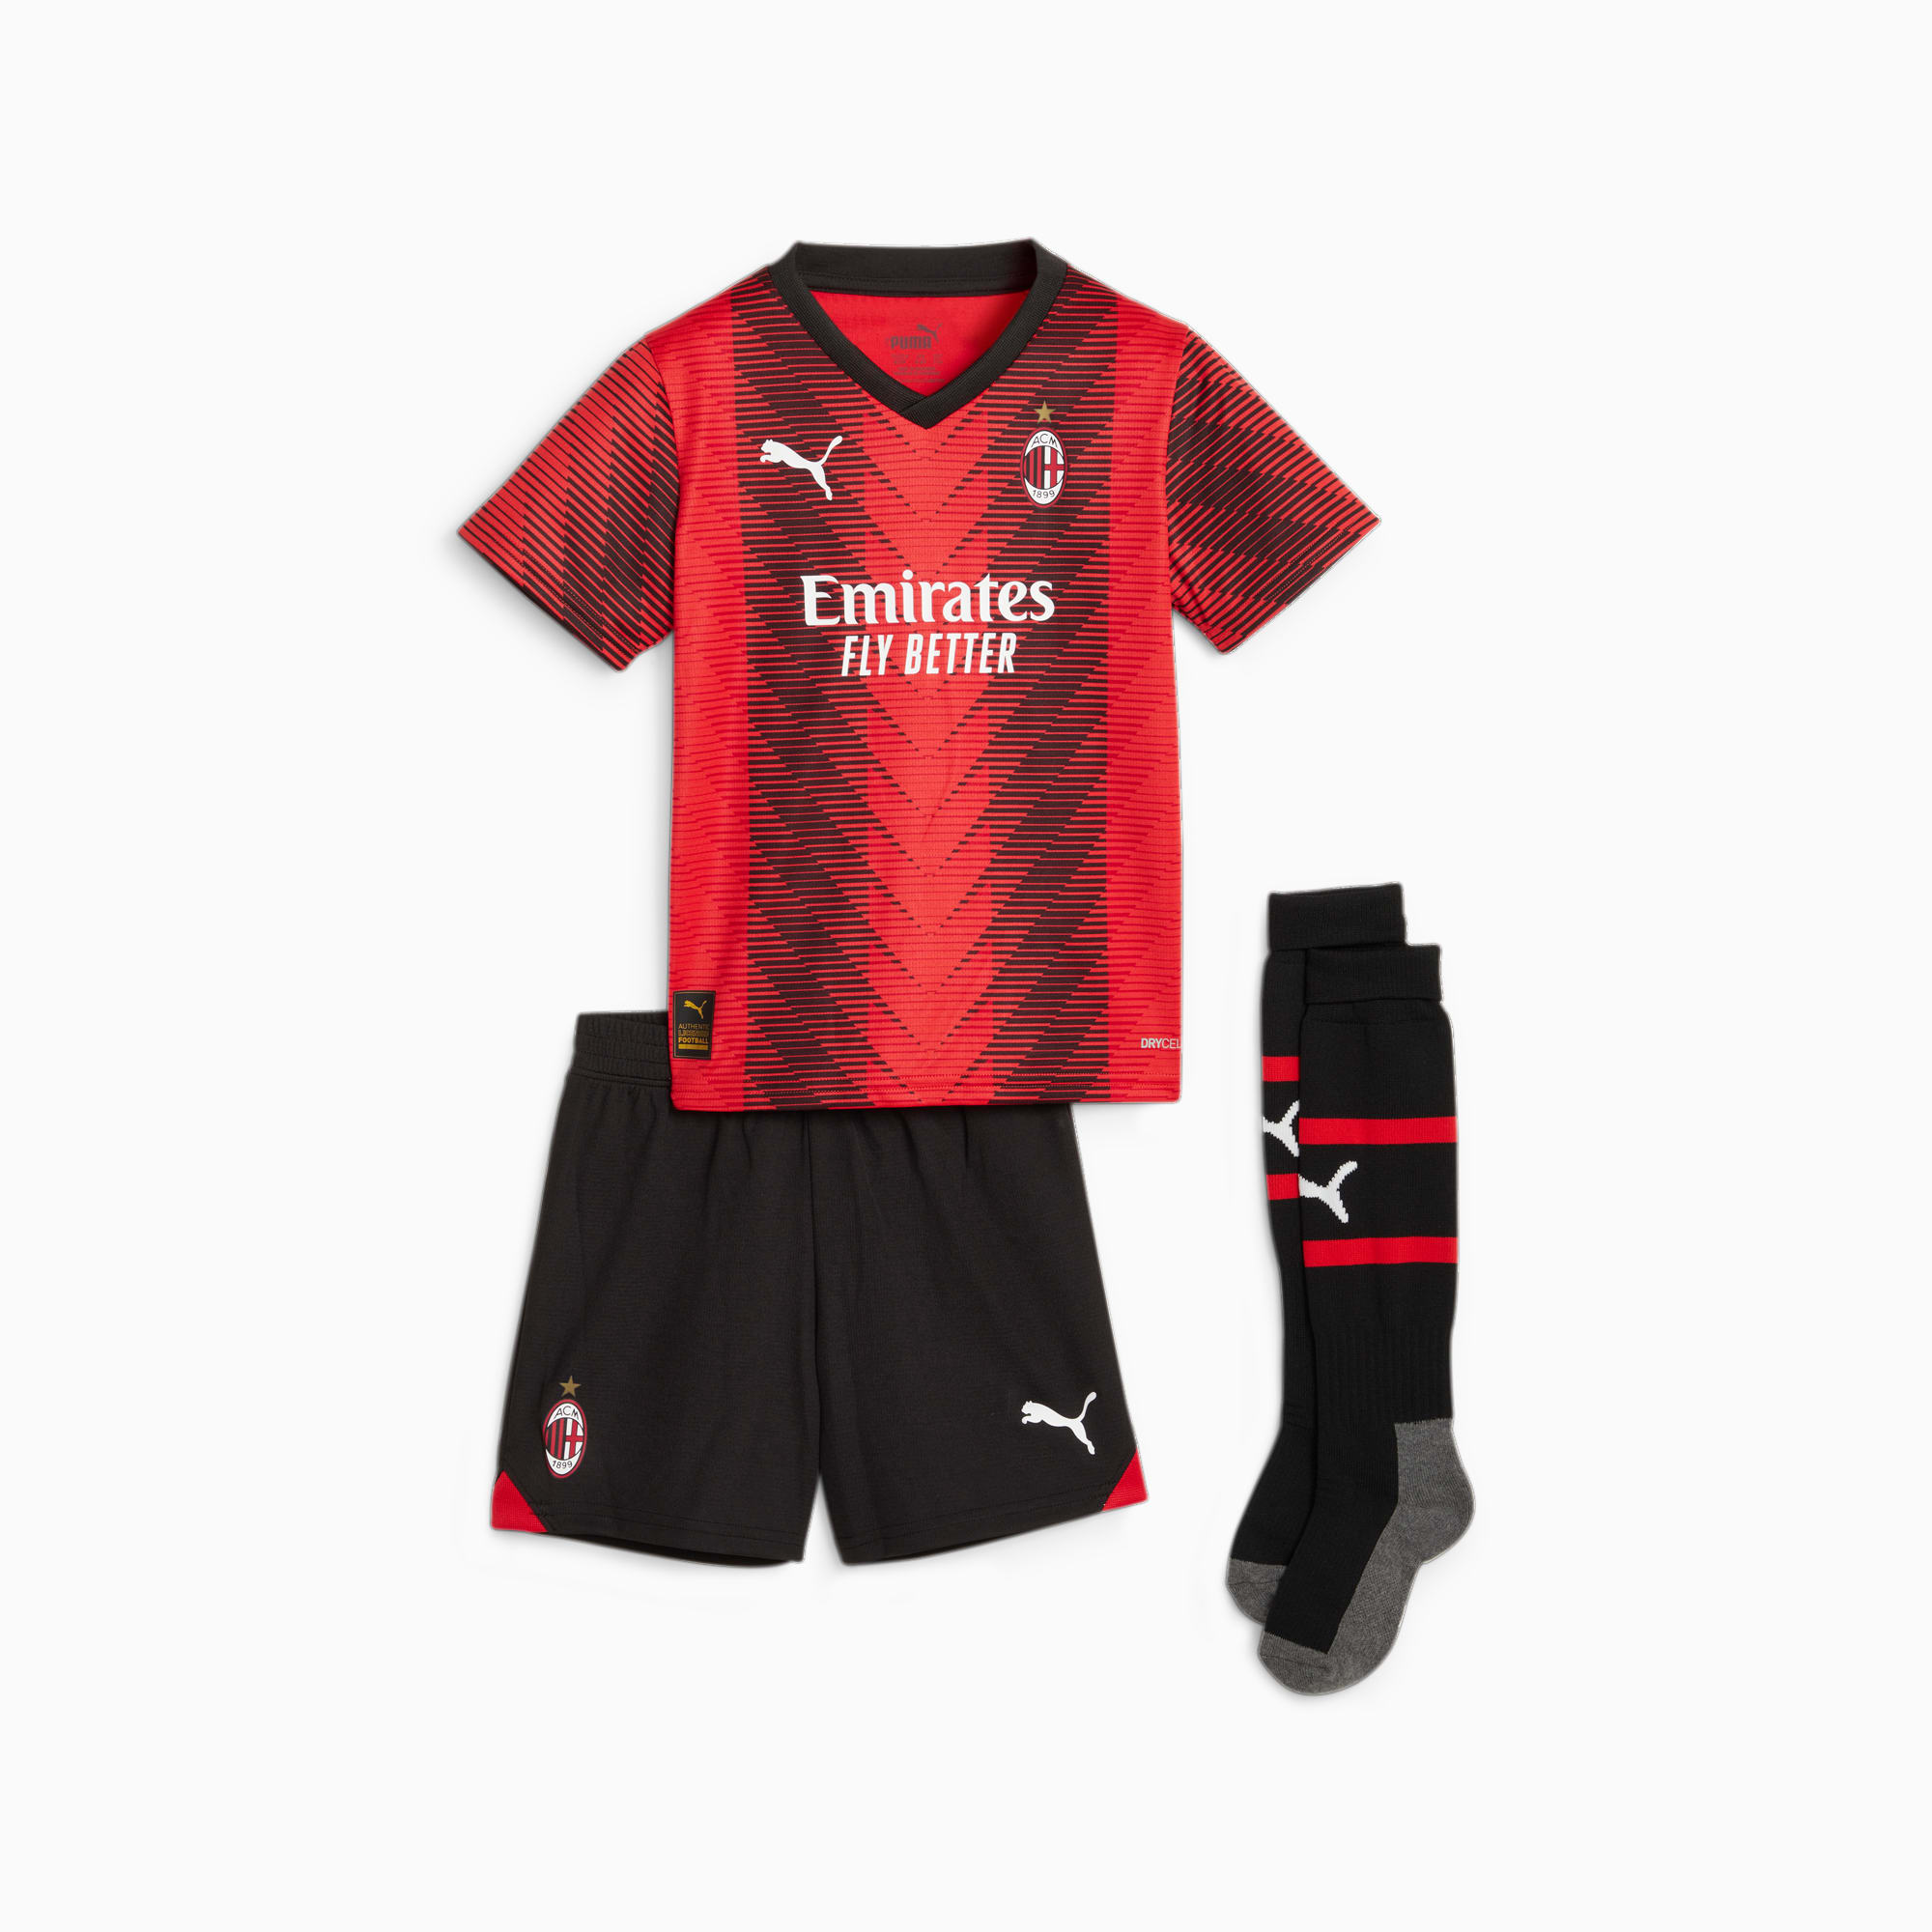 PUMA A.C. Milan 23/24 Home Mini Kit, For All Time Red/Black, Size 104, Clothing